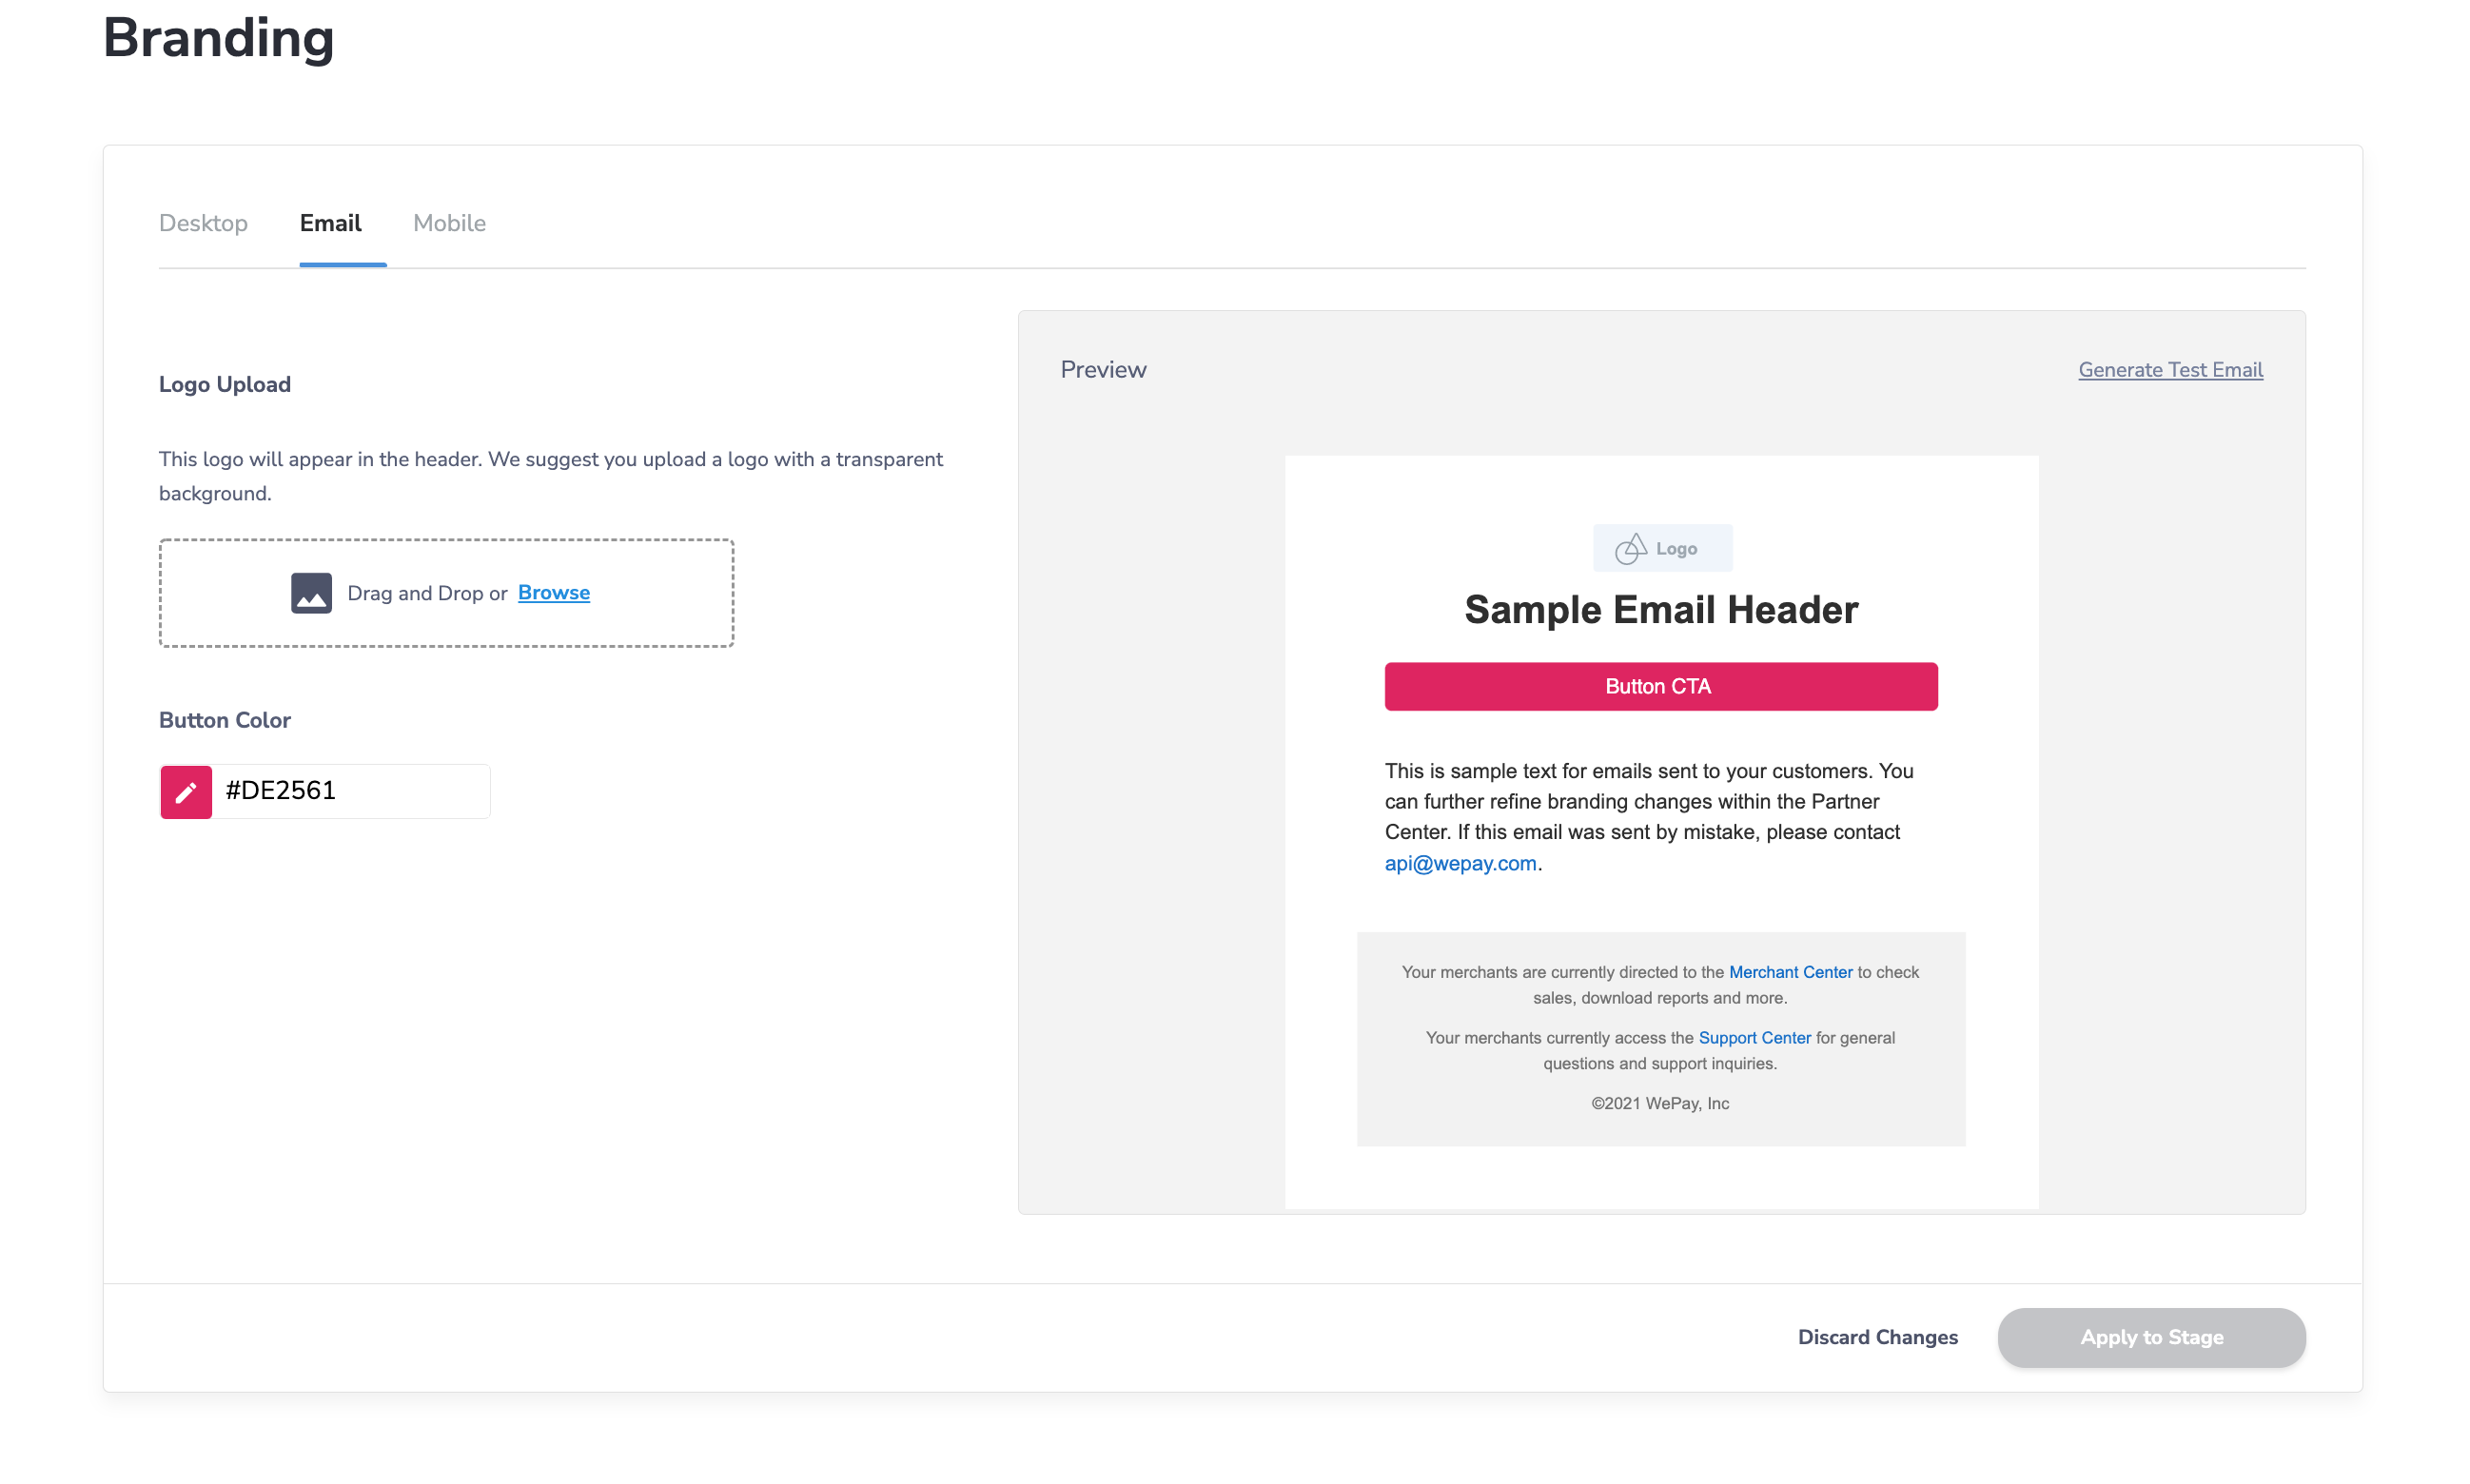 An example of previewing your branding colors and logo on WePay-owned emails in Partner Center